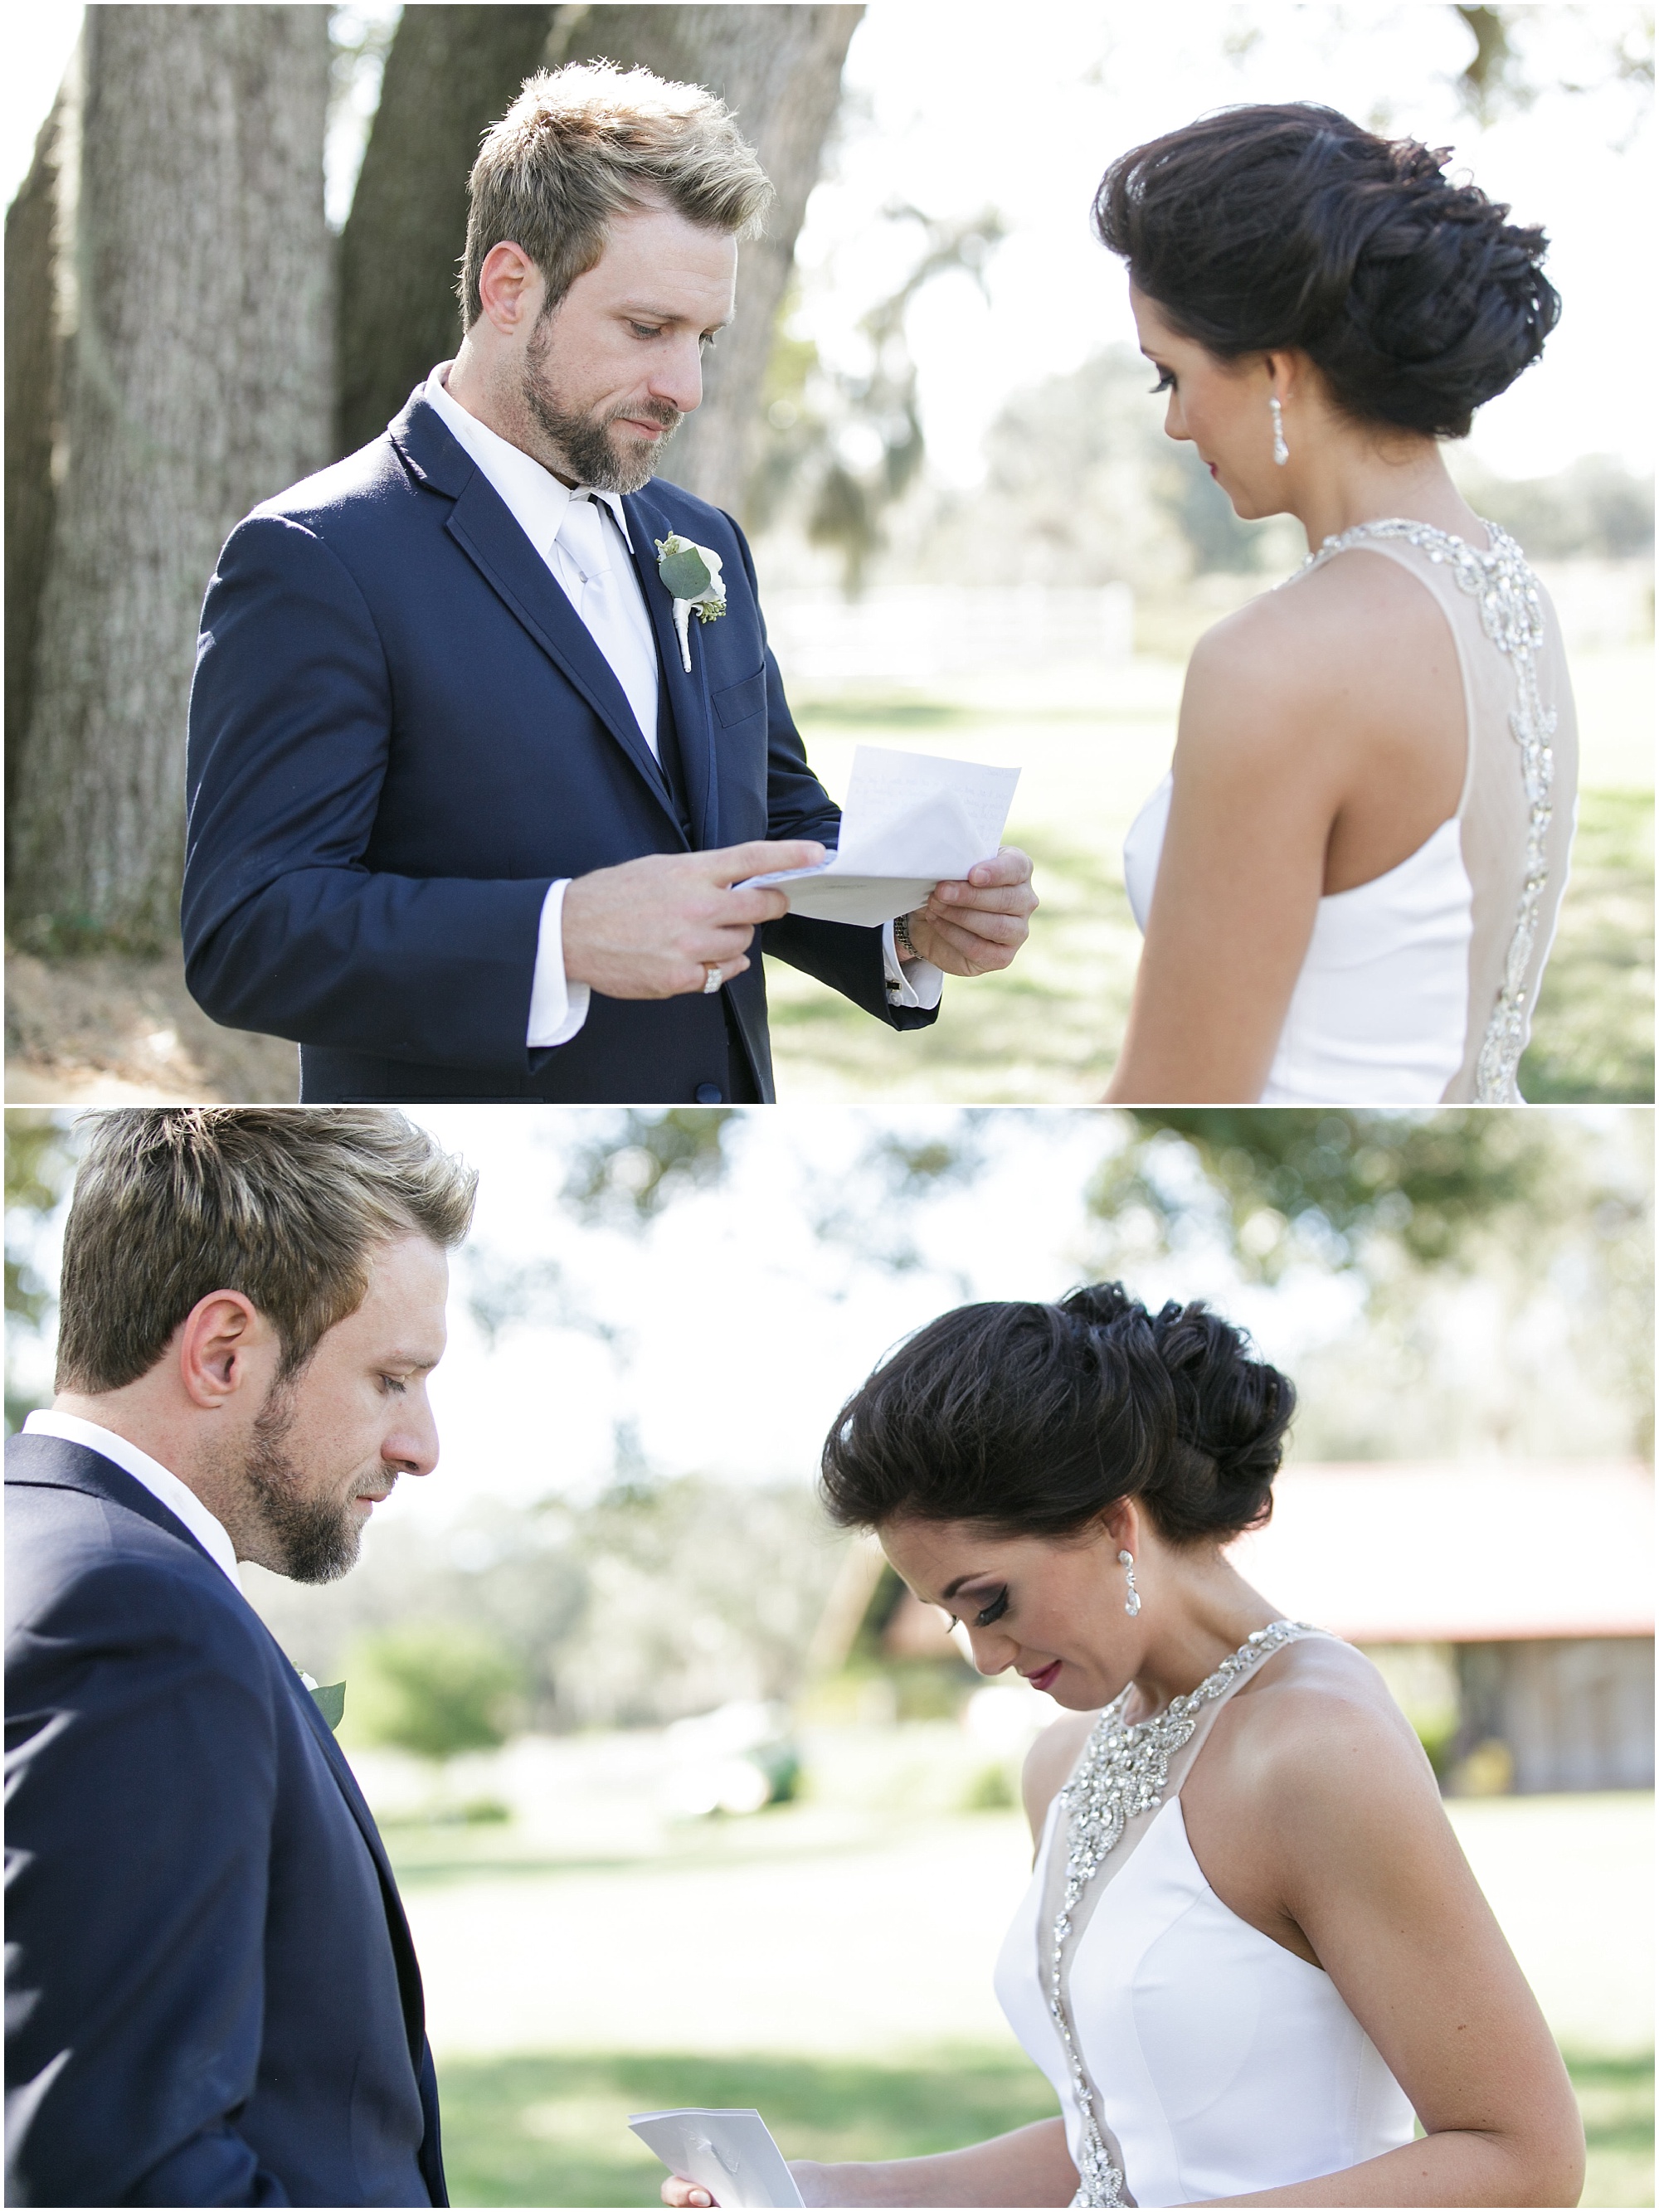 Bride and groom reading letter from each other at Elegance wedding.